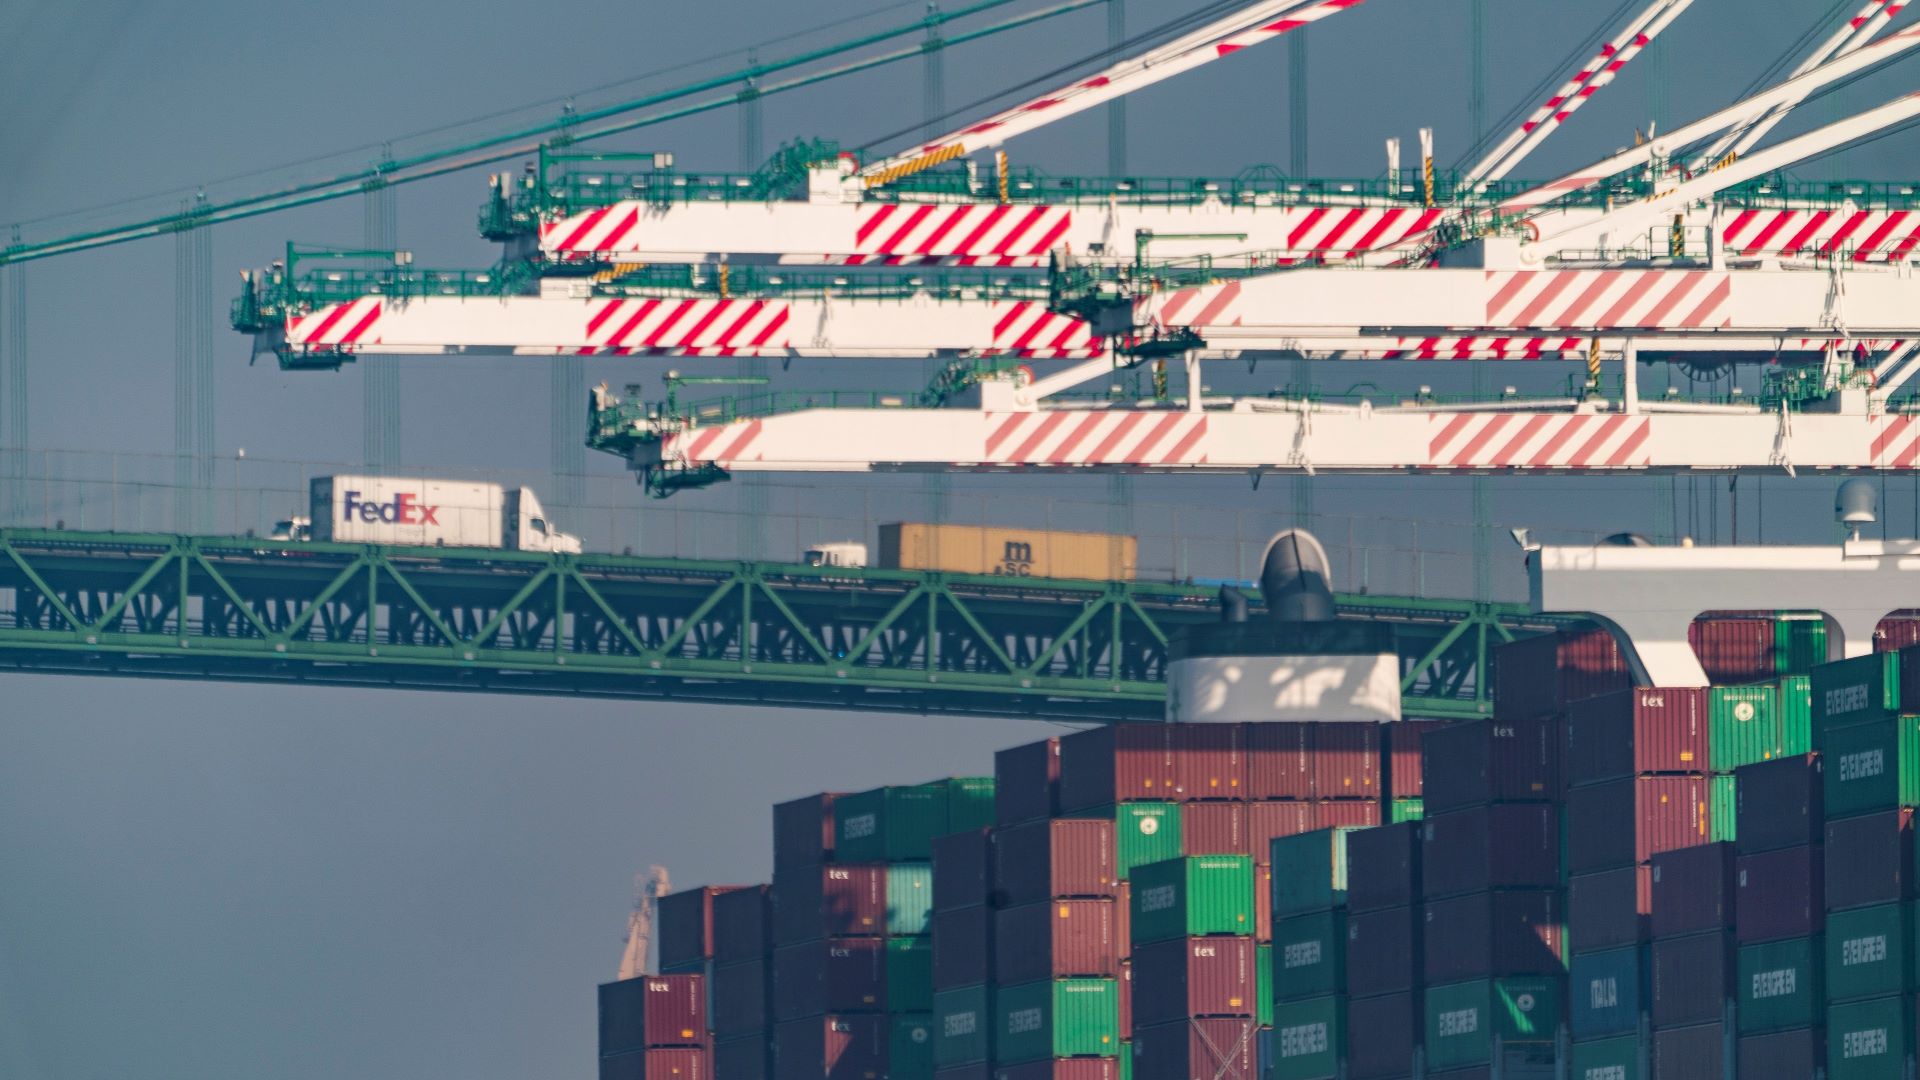 Giant ship cranes extend over containers stacked on a ship with a FedEx truck on a bridge in the background.